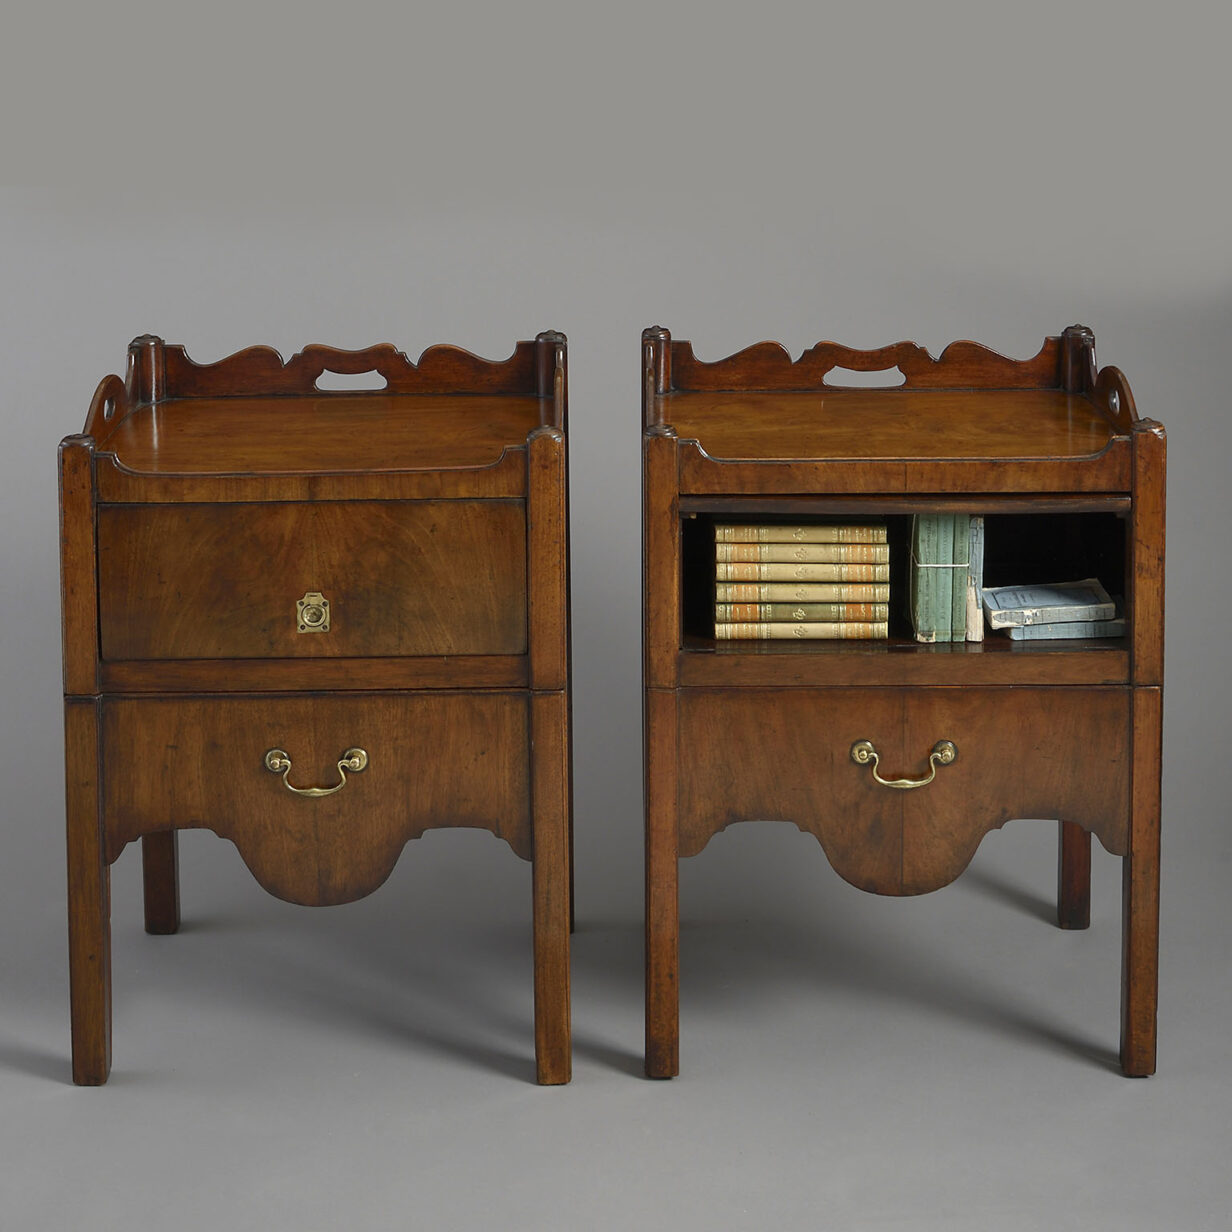 Pair of mid-18th century george iii period mahogany bedside tables